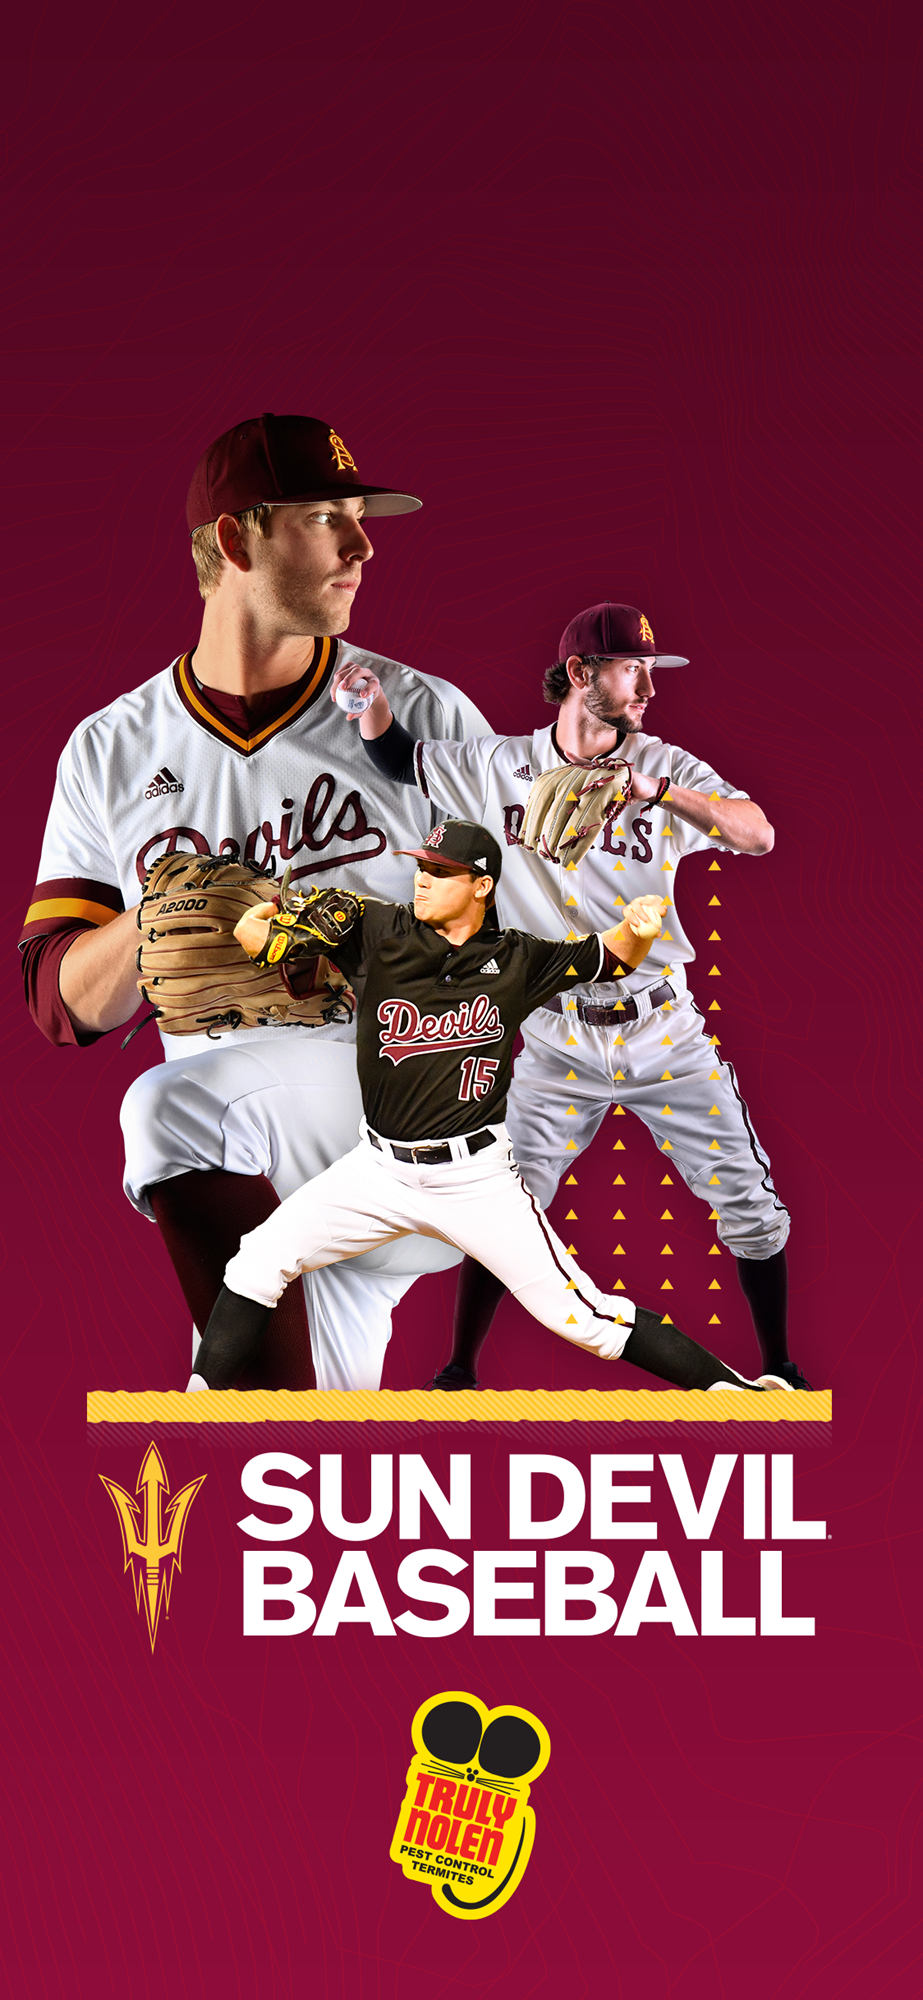 Arizona state baseball posters phone wallpapers and desktop backgrounds